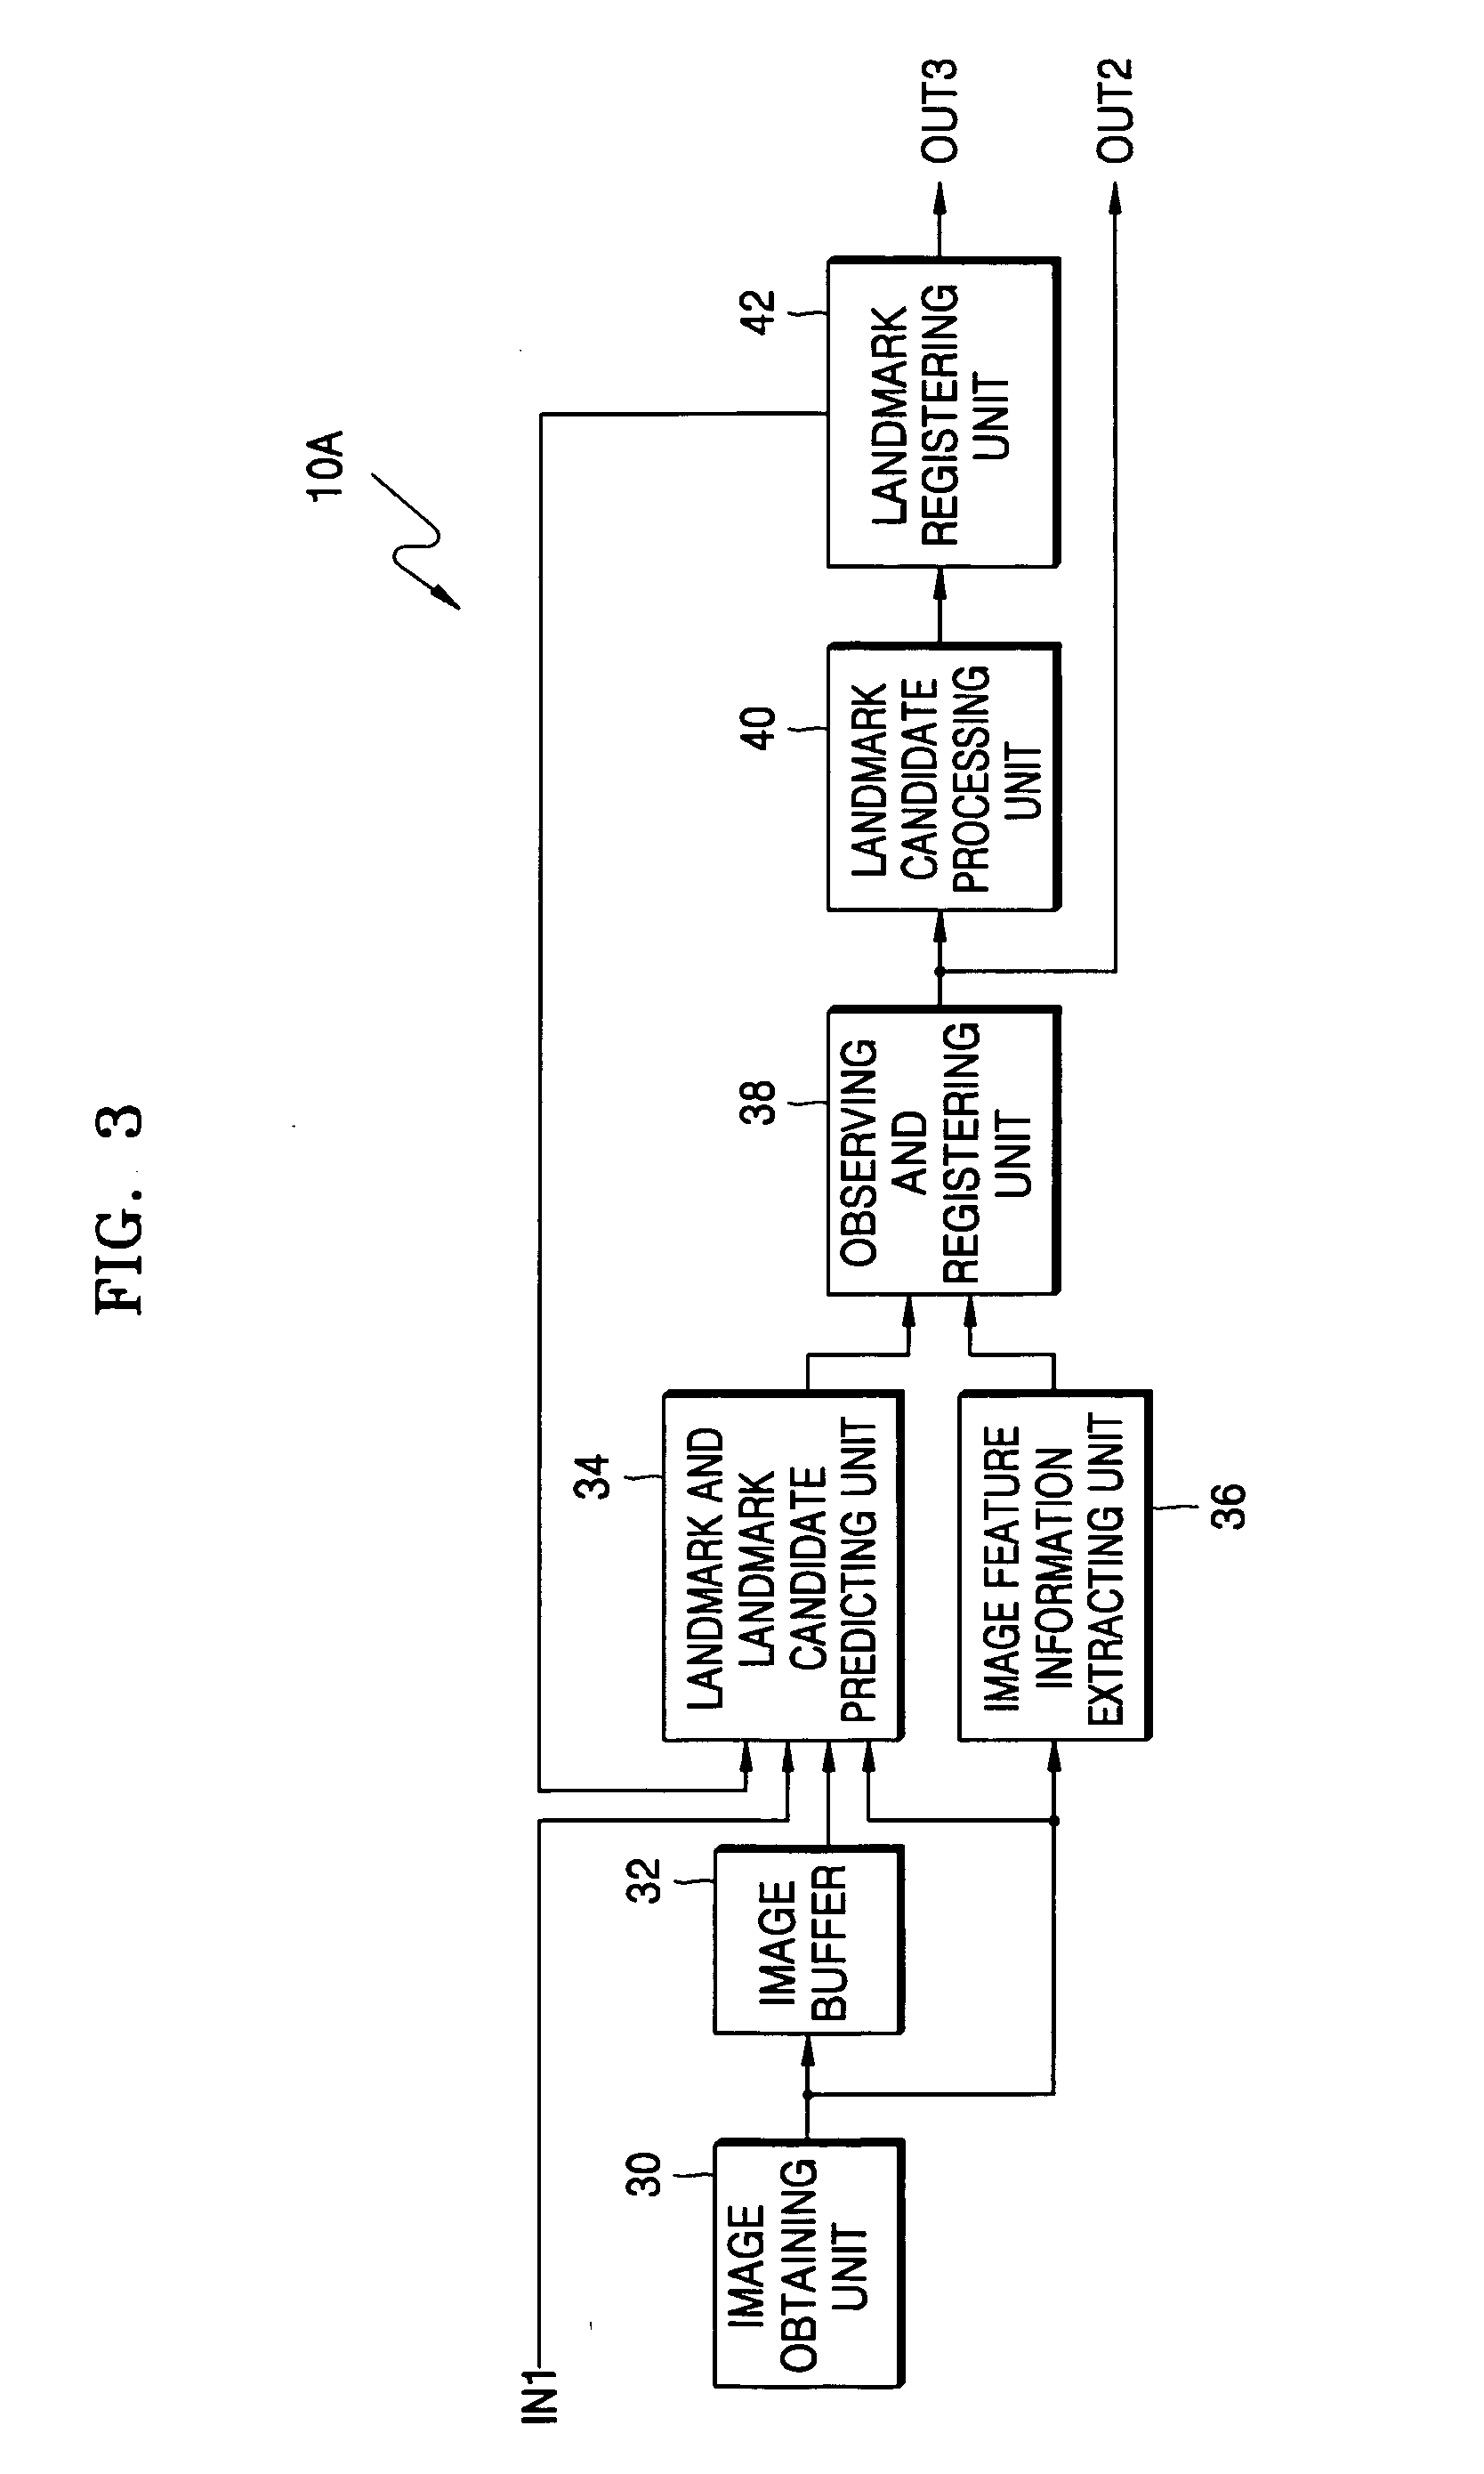 Apparatus and method for estimating location of mobile body and generating map of mobile body environment using upper image of mobile body environment, and computer readable recording medium storing computer program controlling the apparatus